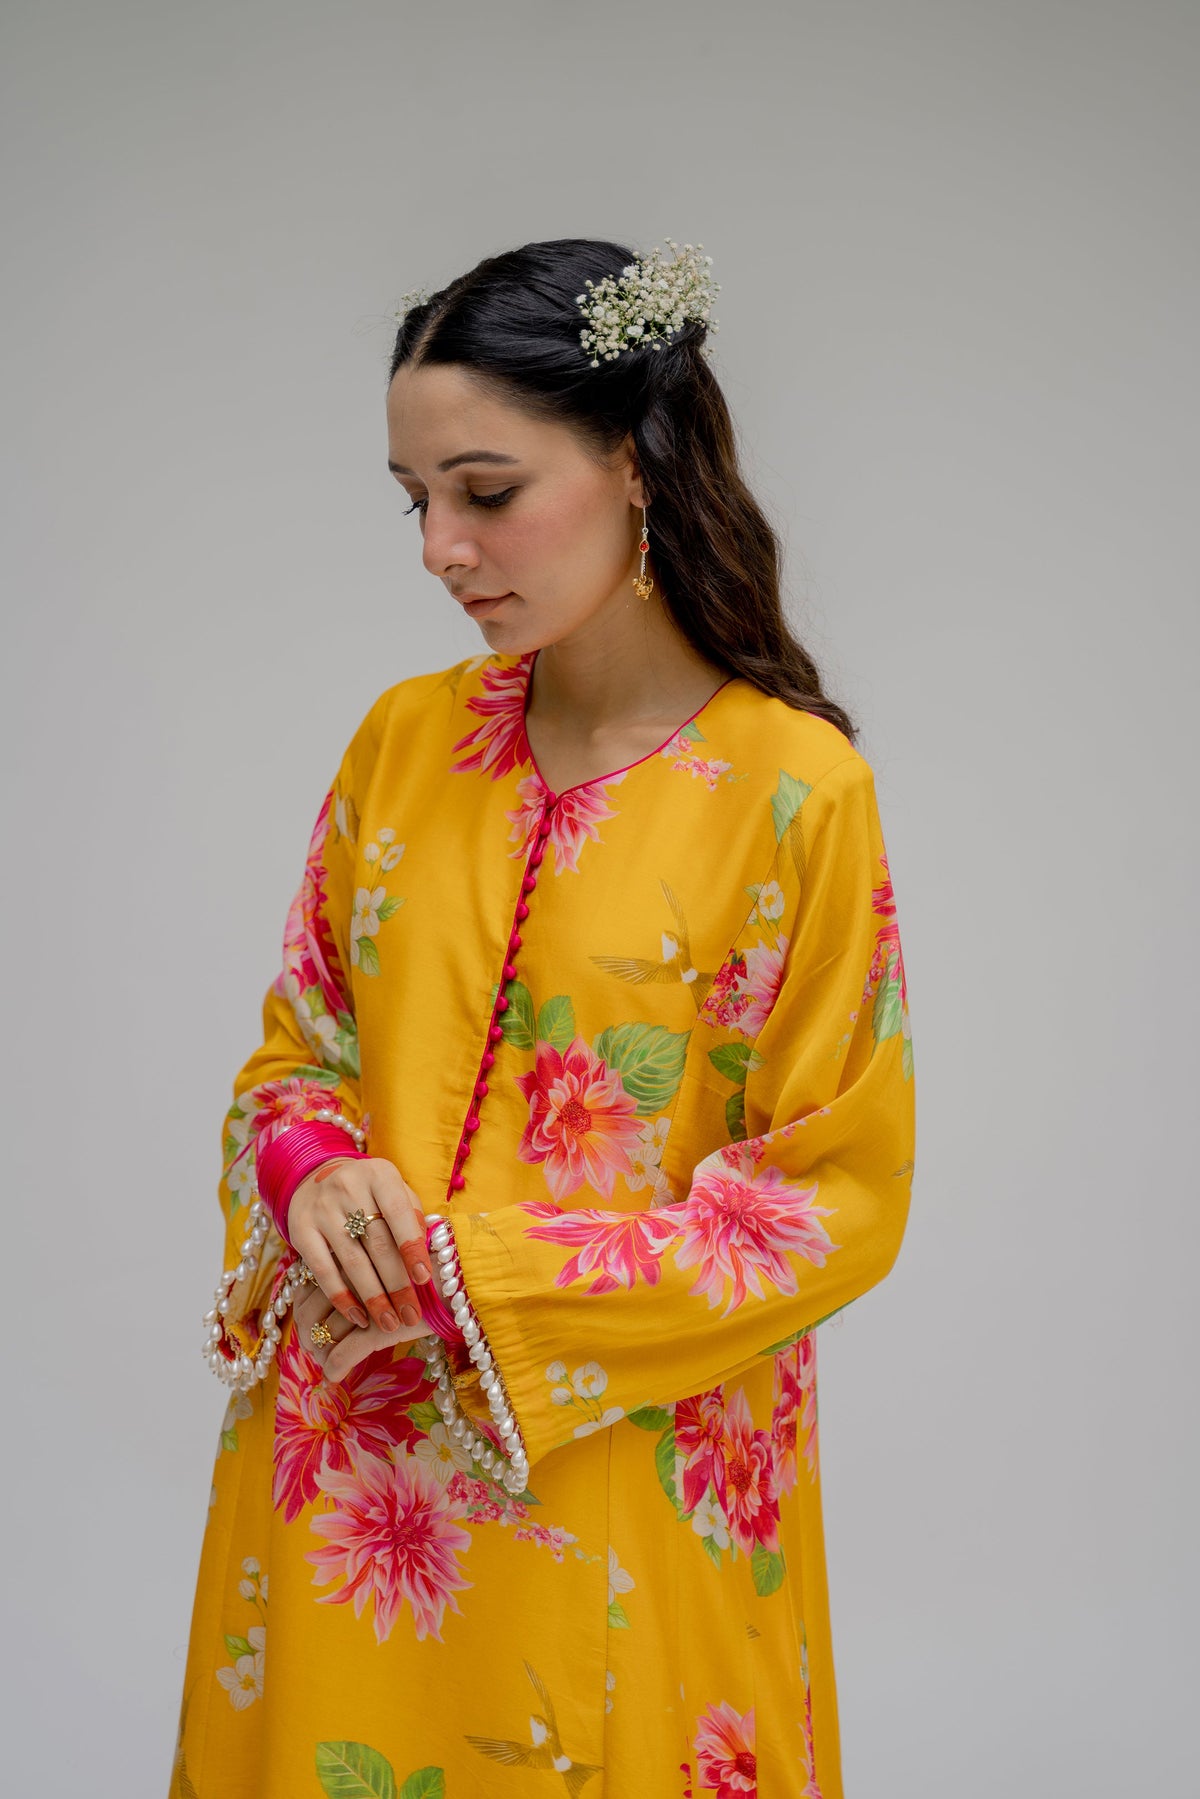 Kishwer Merchantt in Baagh- Yellow Floral Printed Suit - Set of 3